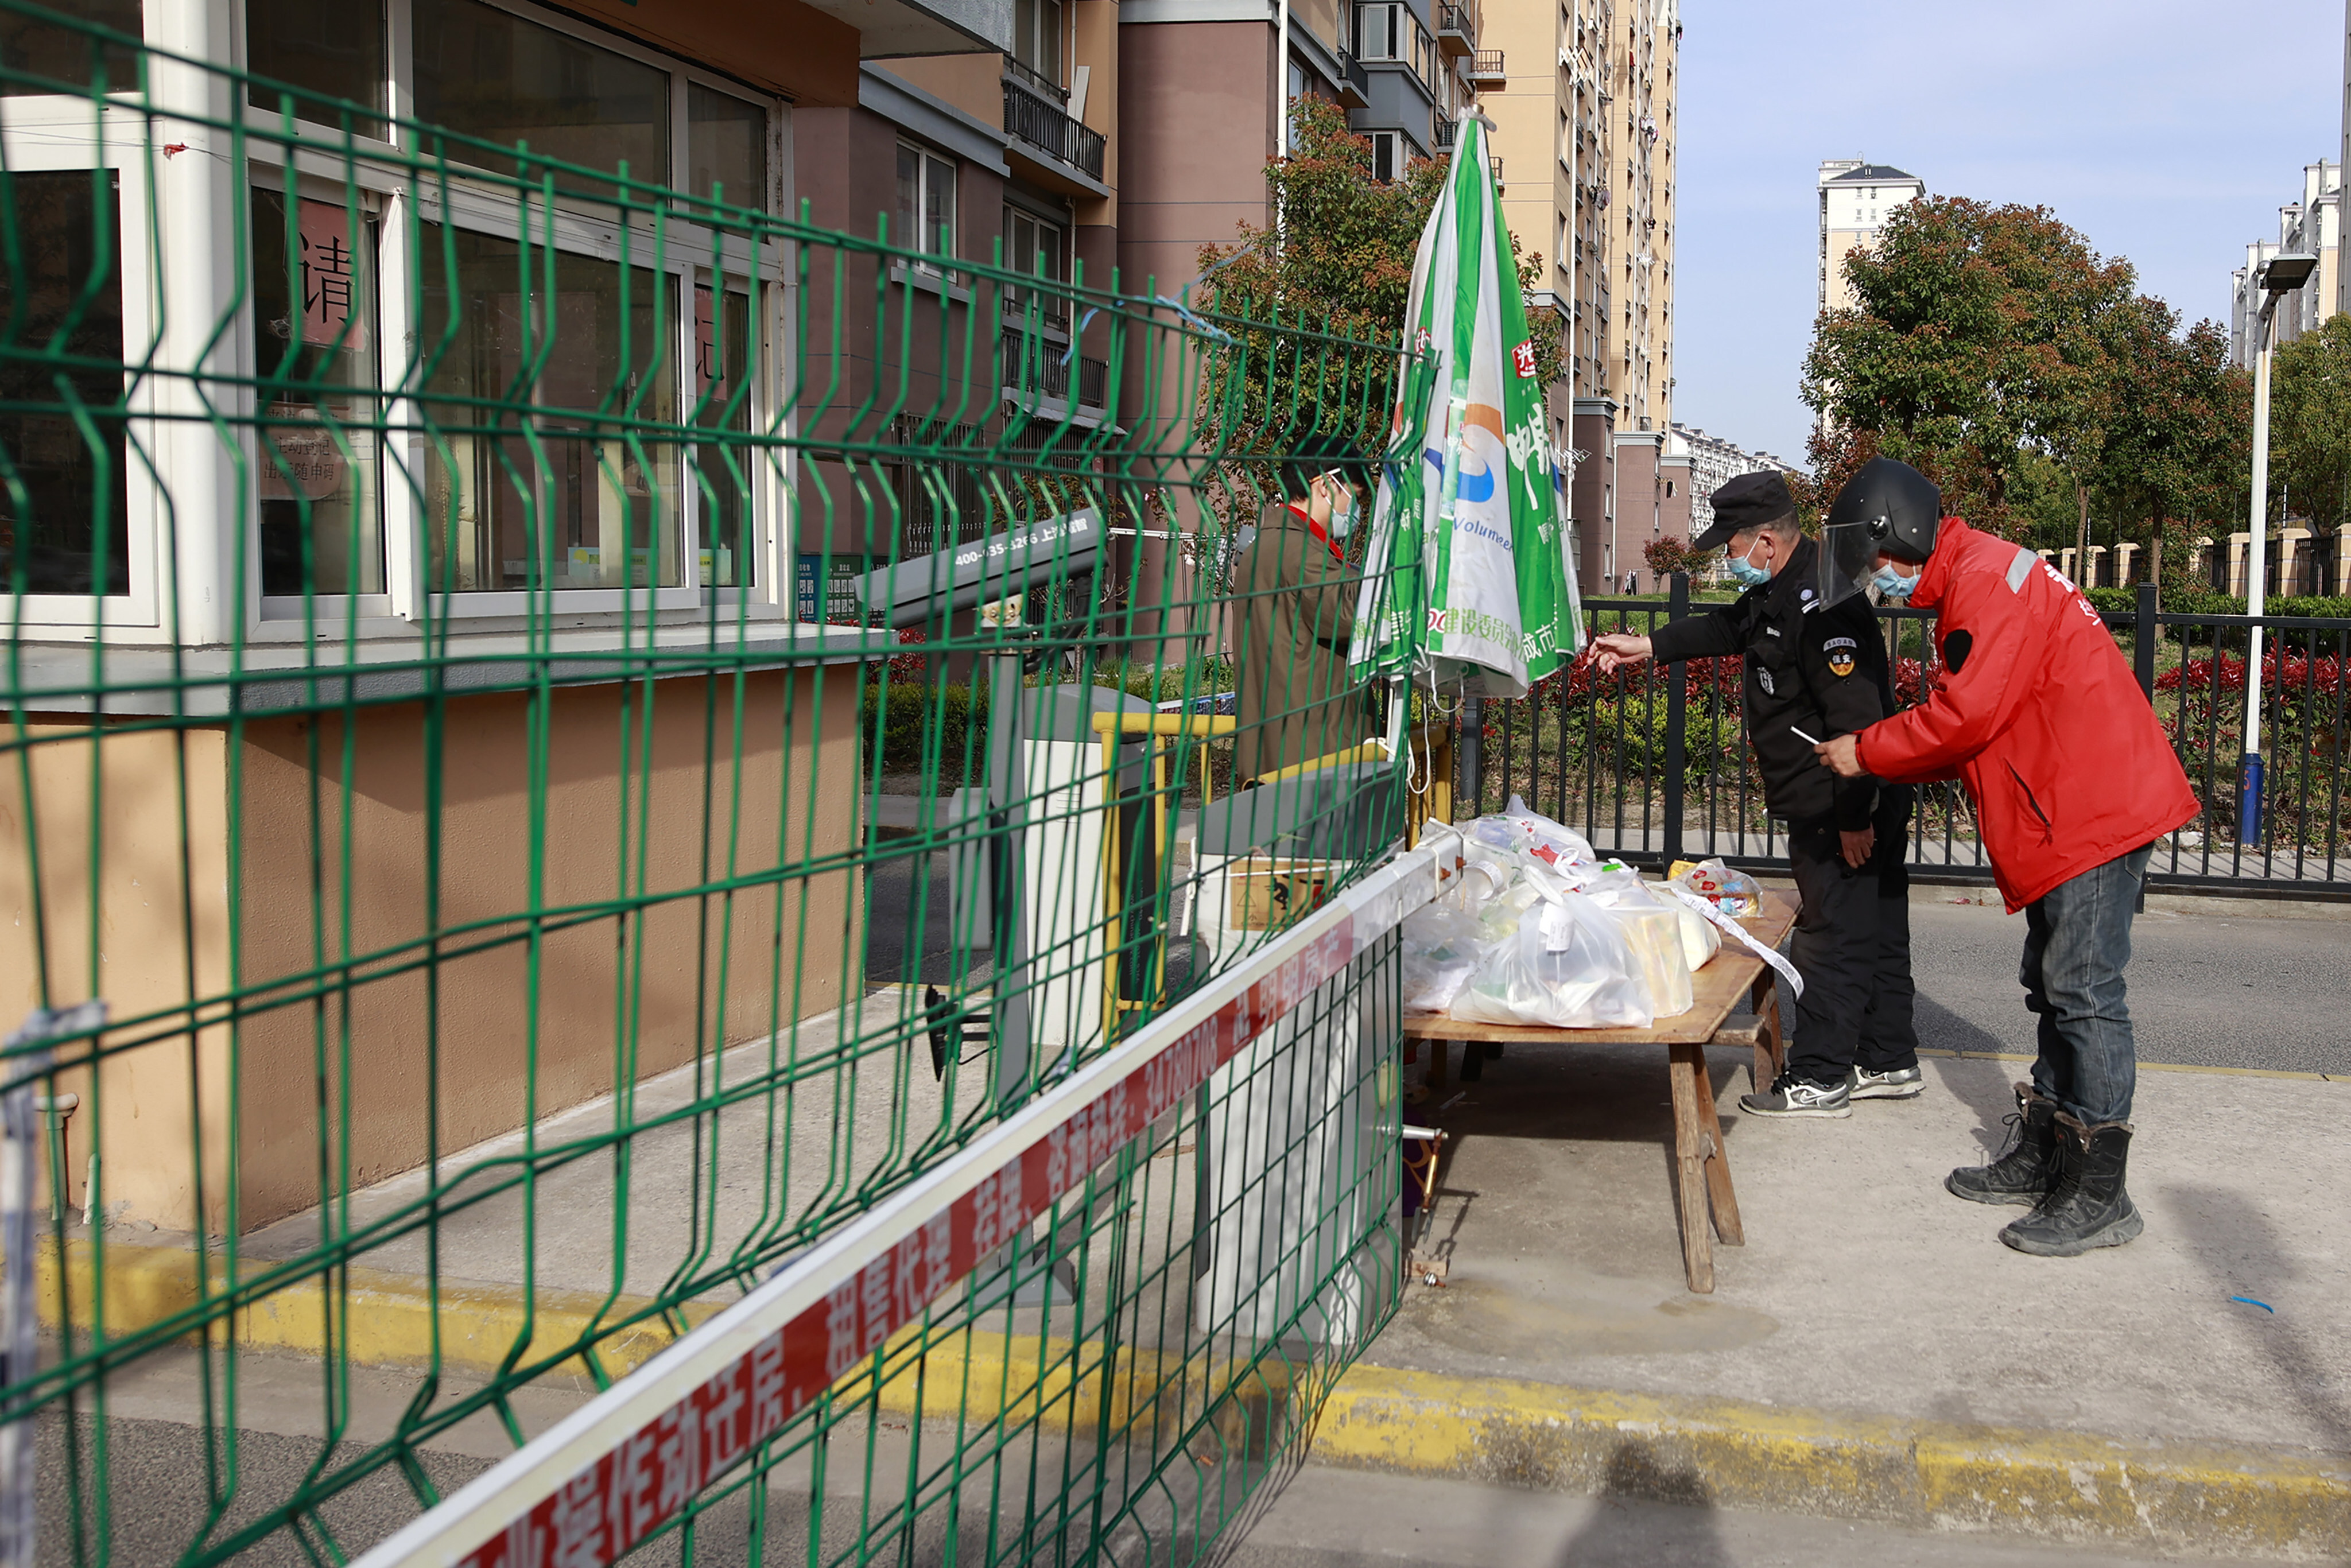 A security guard helps a resident collect their deliveries as more items are placed on a table at the gate of a residential community under lockdown in Shanghai on March 29. A two-phase lockdown of Shanghai’s 26 million people is testing the limits of China’s hardline “zero-Covid” strategy, which is shaking markets far beyond the country’s borders. Photo: AP